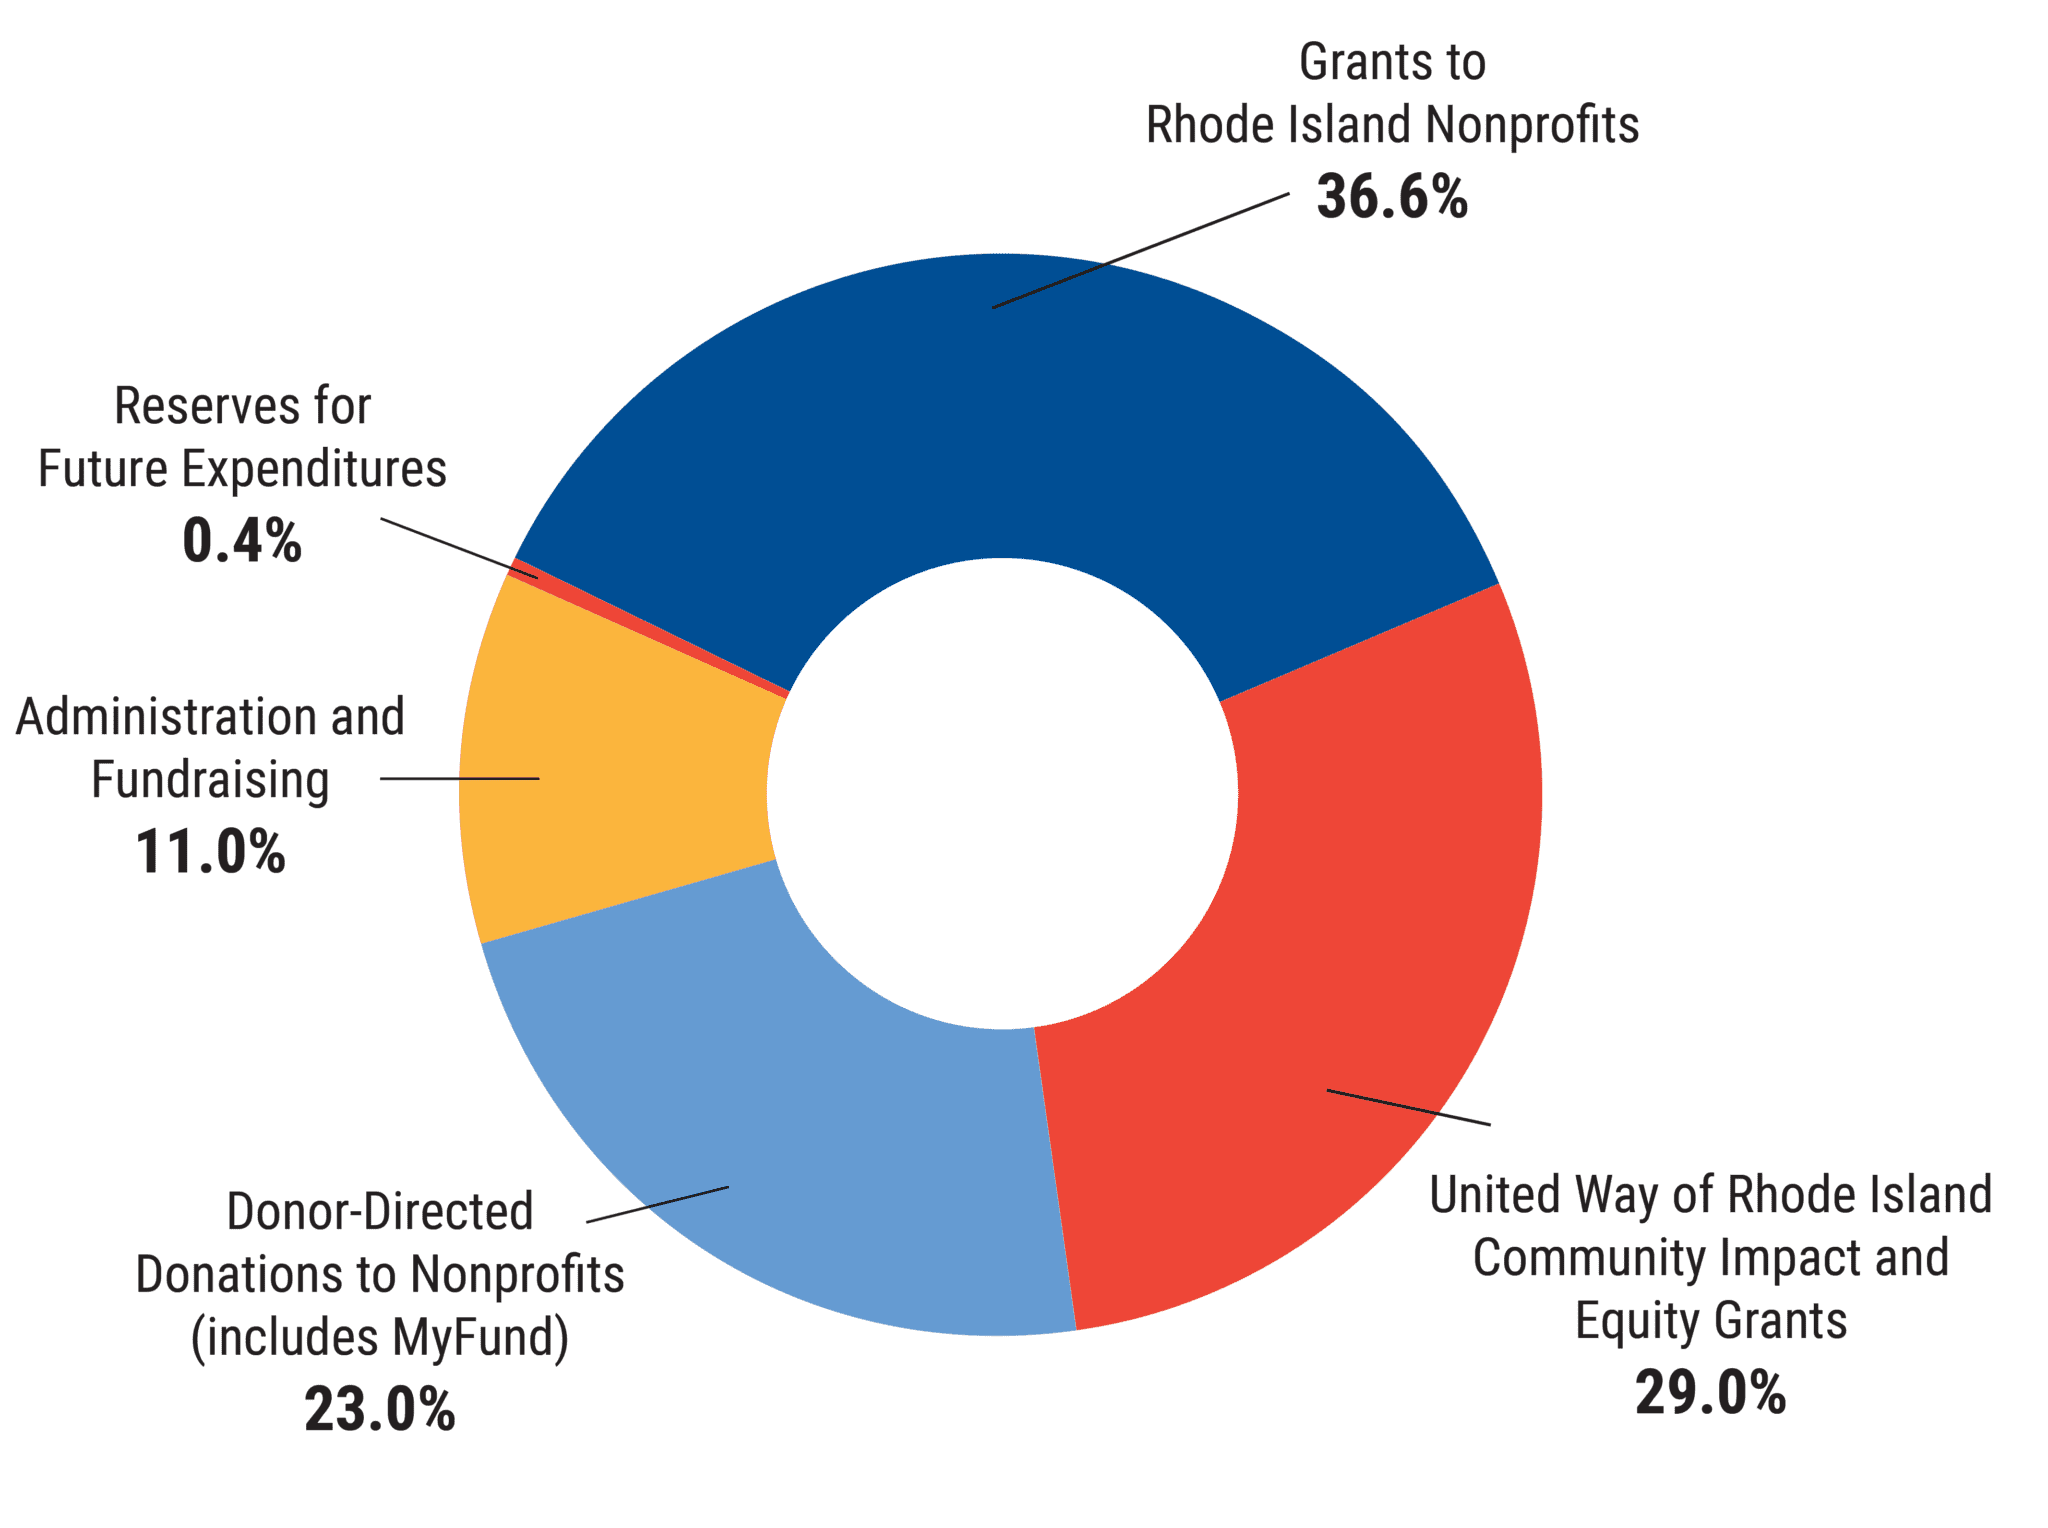 Grants to Rhode Island Nonprofits (36.6%), United Way of Rhode Island Community Impact and Equity Grants 29%, Donor-Directed Donation to Nonprofits (includes MyFund) 23%, Administration and Fundraising 11%, Reserves for Future Expenditures (.04%)